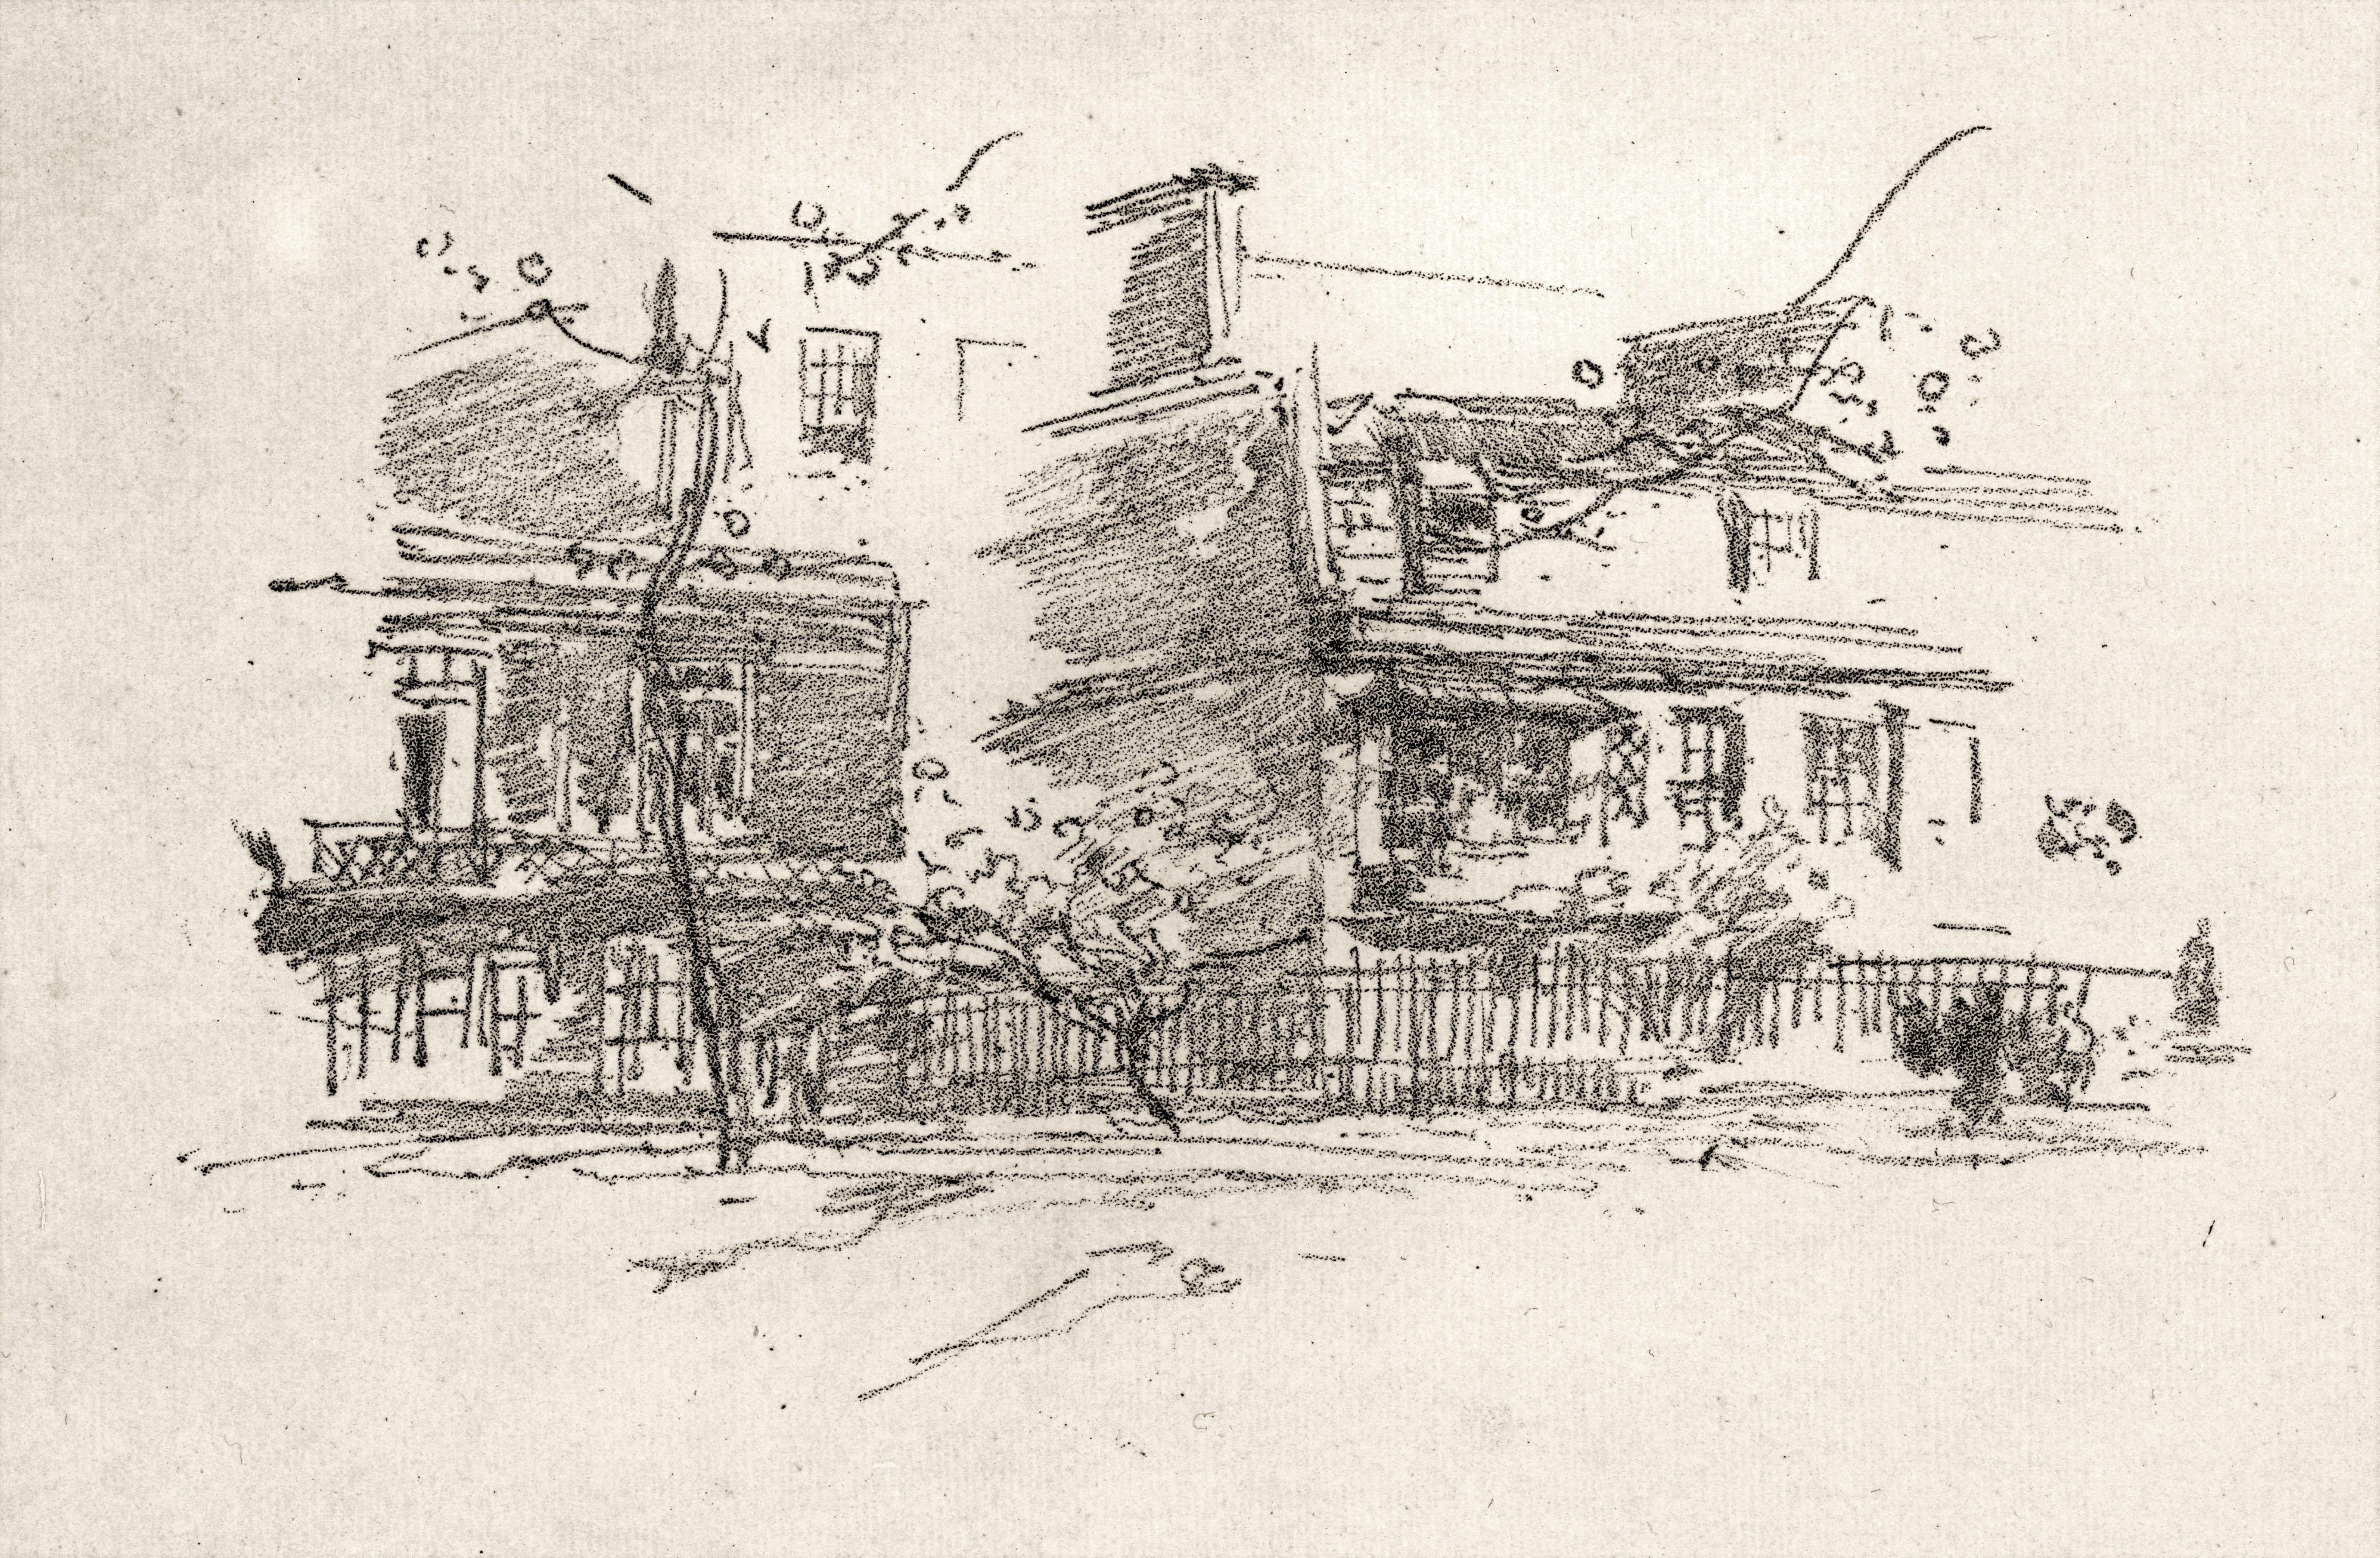 Lindsey Row, Chelsea - Print by James Abbott McNeill Whistler